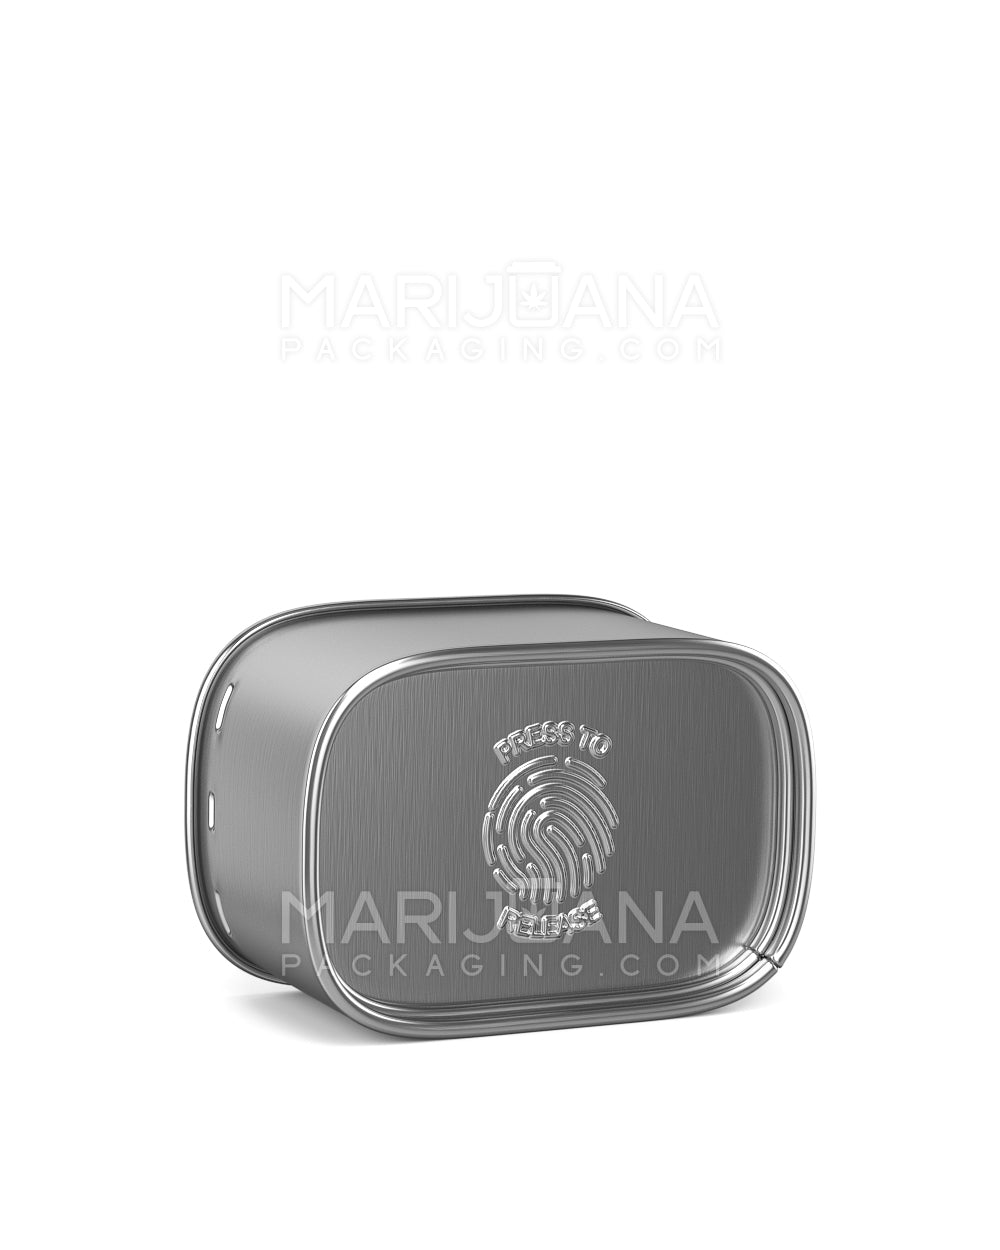 Child Resistant & Sustainable | 100% Recyclable PushTin Small Container | 1oz - Silver Tin - 250 Count - 10